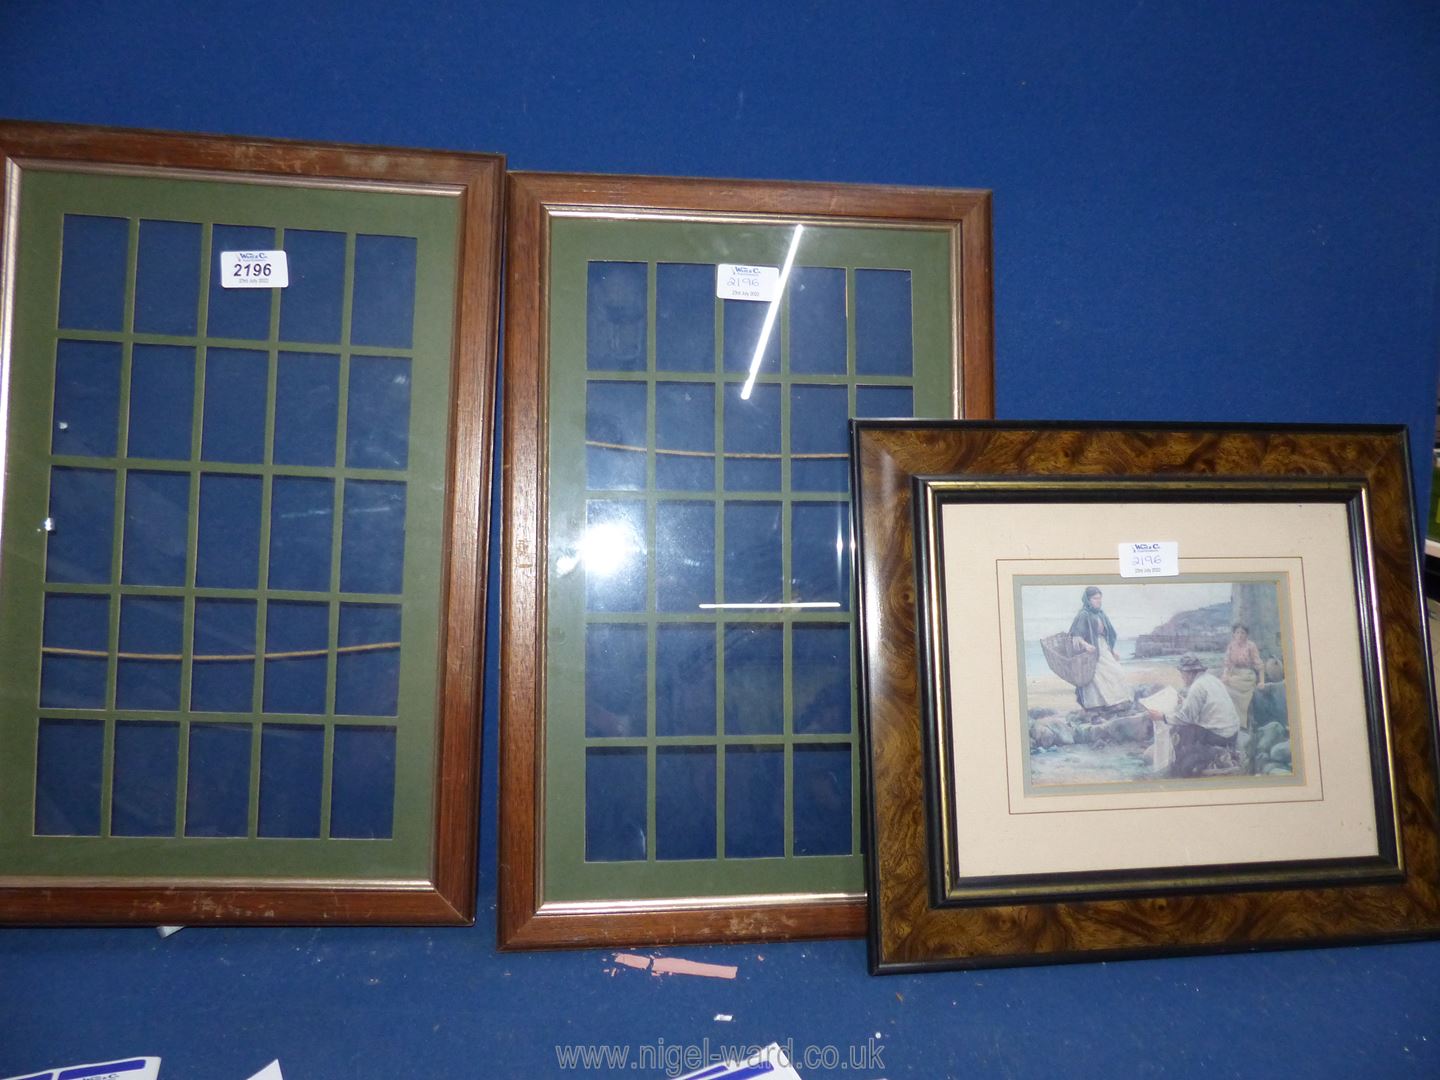 Two empty frames for cigarette card displays and a framed print of Figures in a harbour.